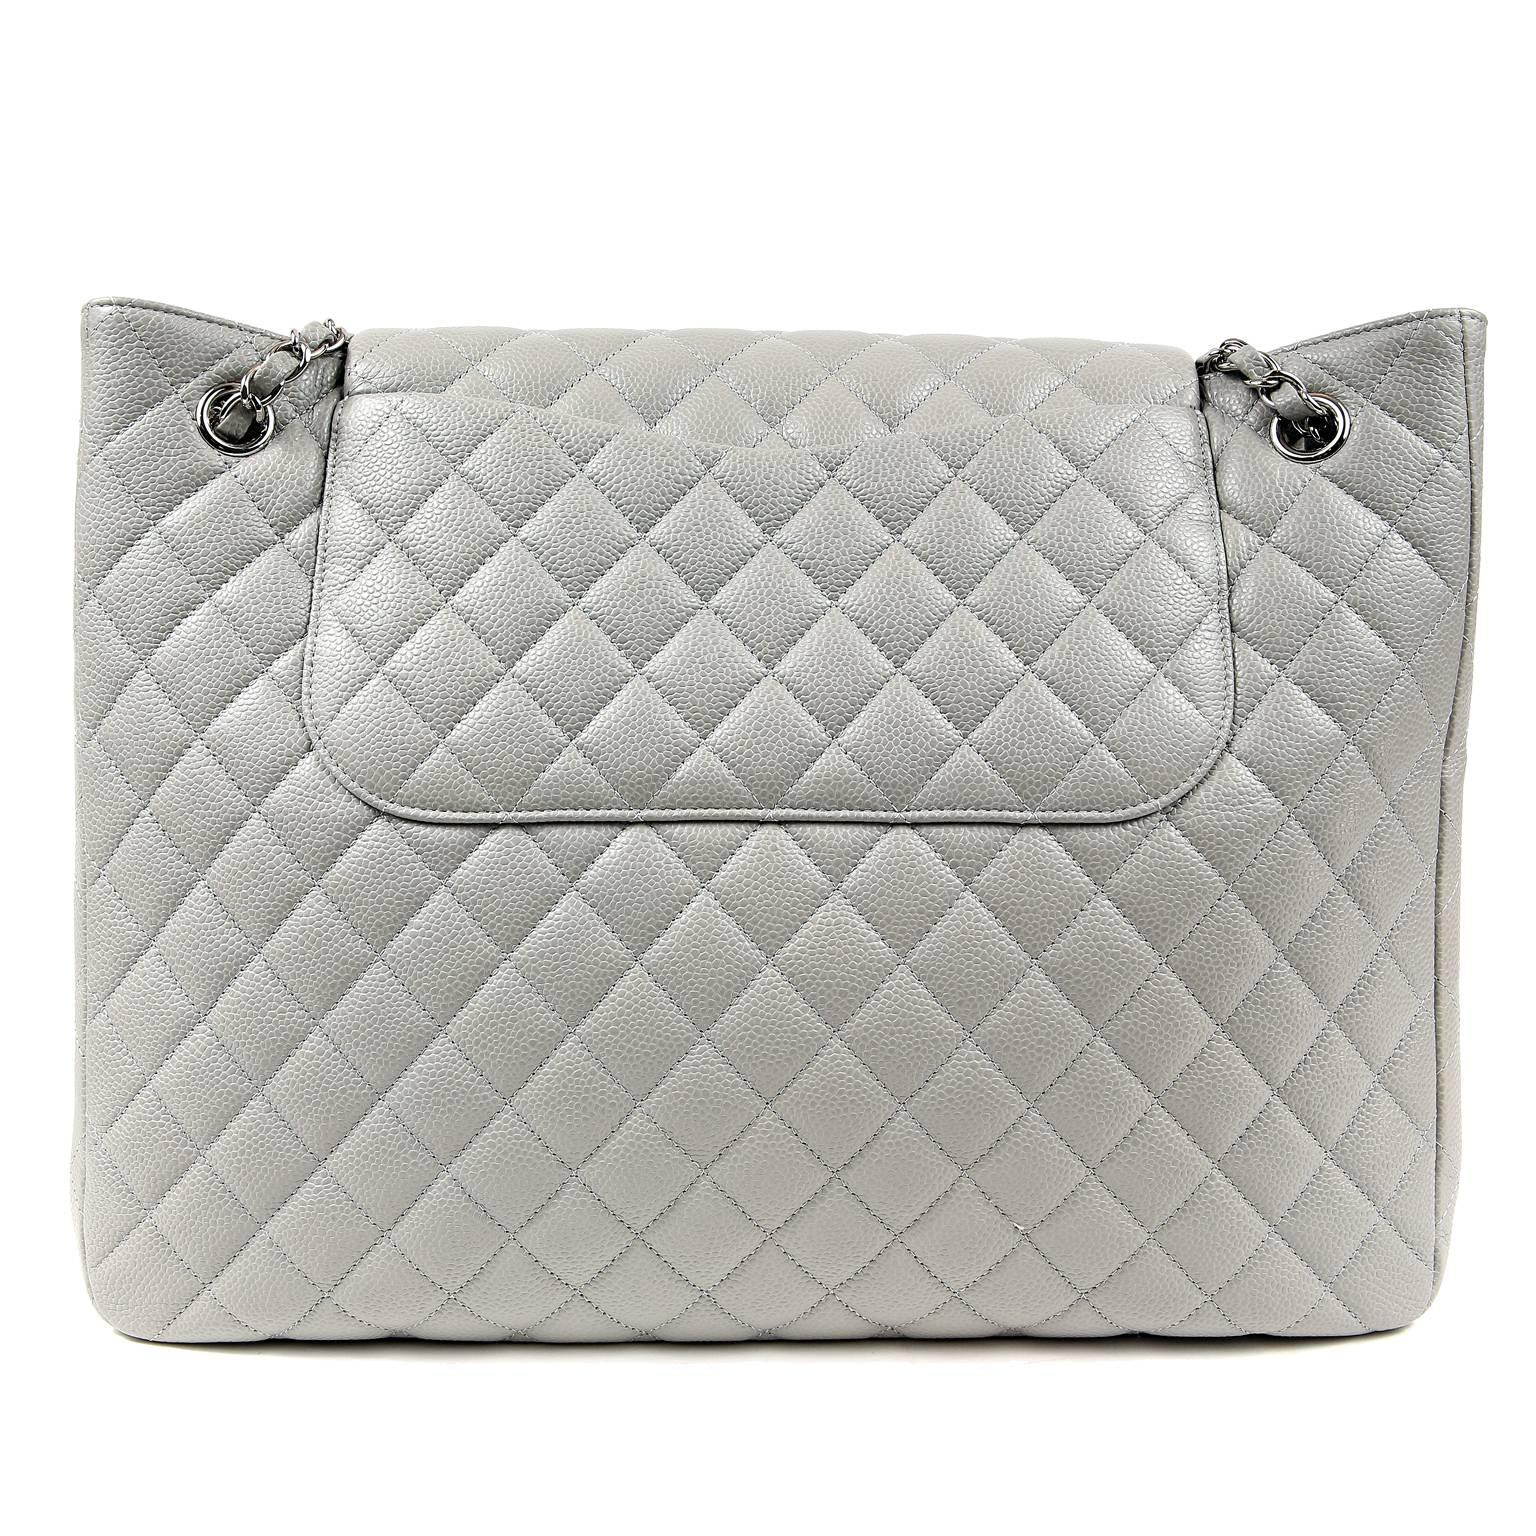 Chanel Grey Caviar Leather Tote- PRISTINE!
  The classic style has a unique flap closure concealing a roomy pocket for essential items. 

Durable and textured grey caviar leather is quilted in signature Chanel diamond pattern.  Large flap over